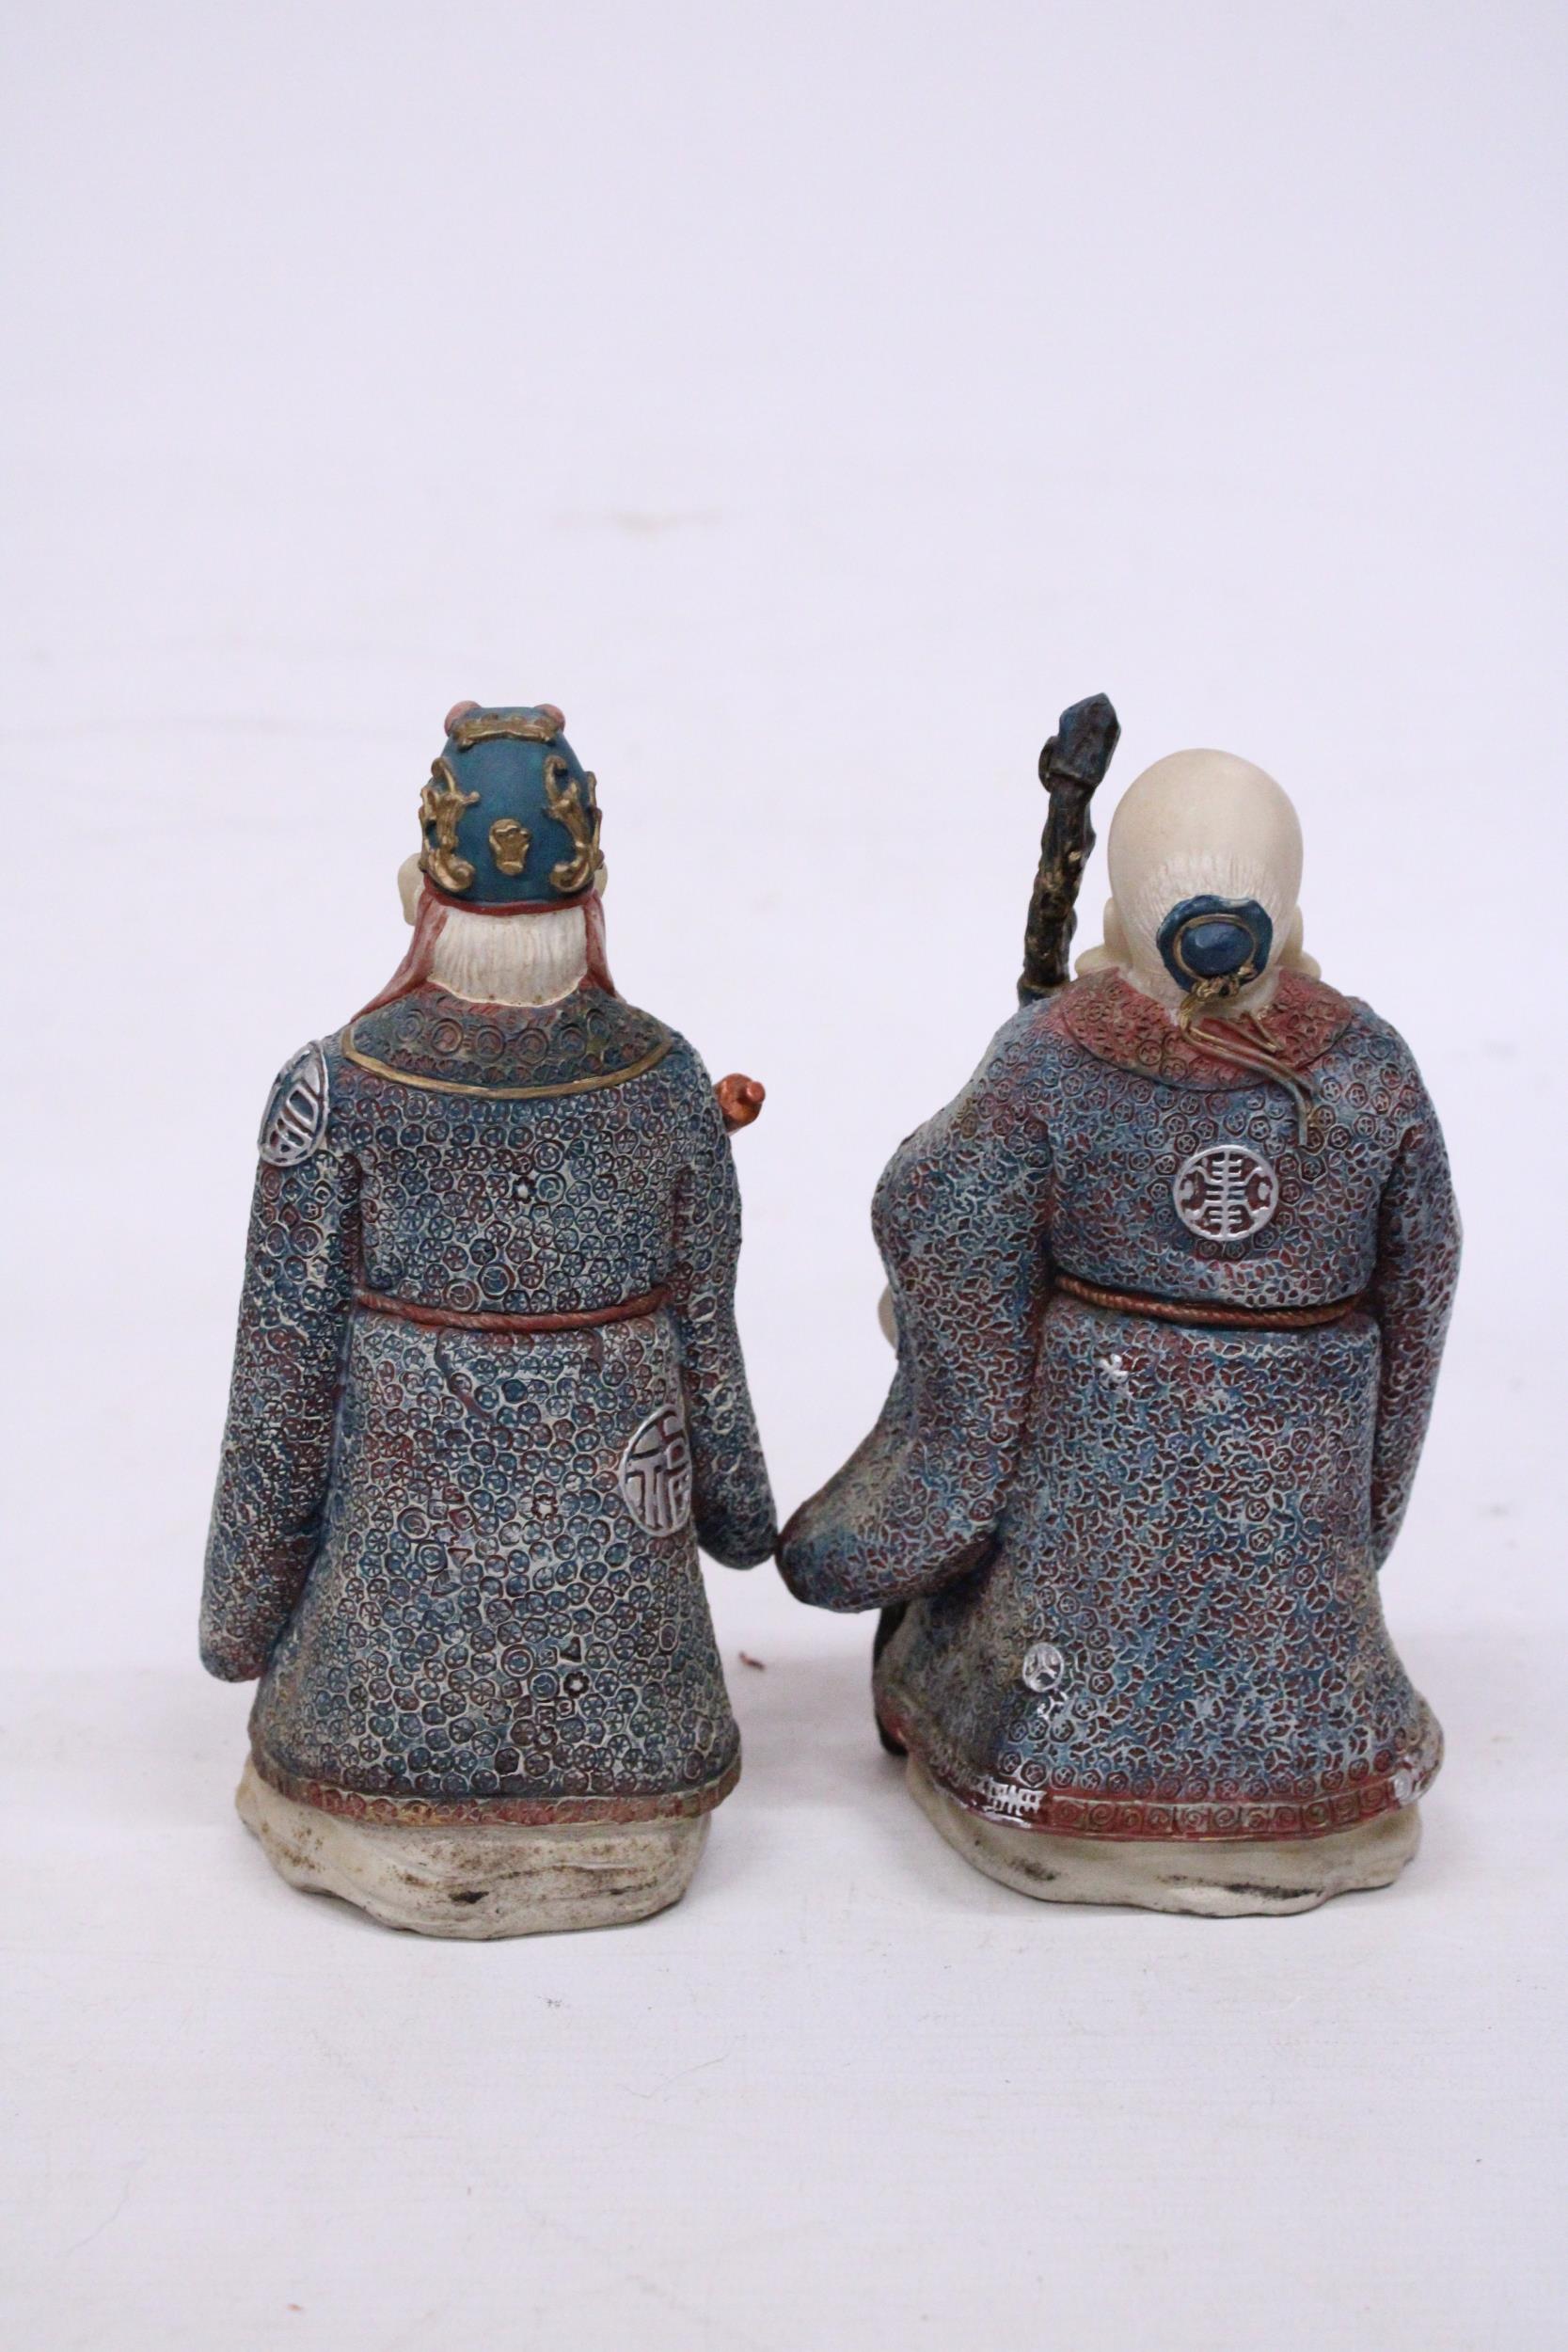 TWO HEAVY STONE MANDARIN FIGURES - 7 INCH (H) - Image 3 of 6